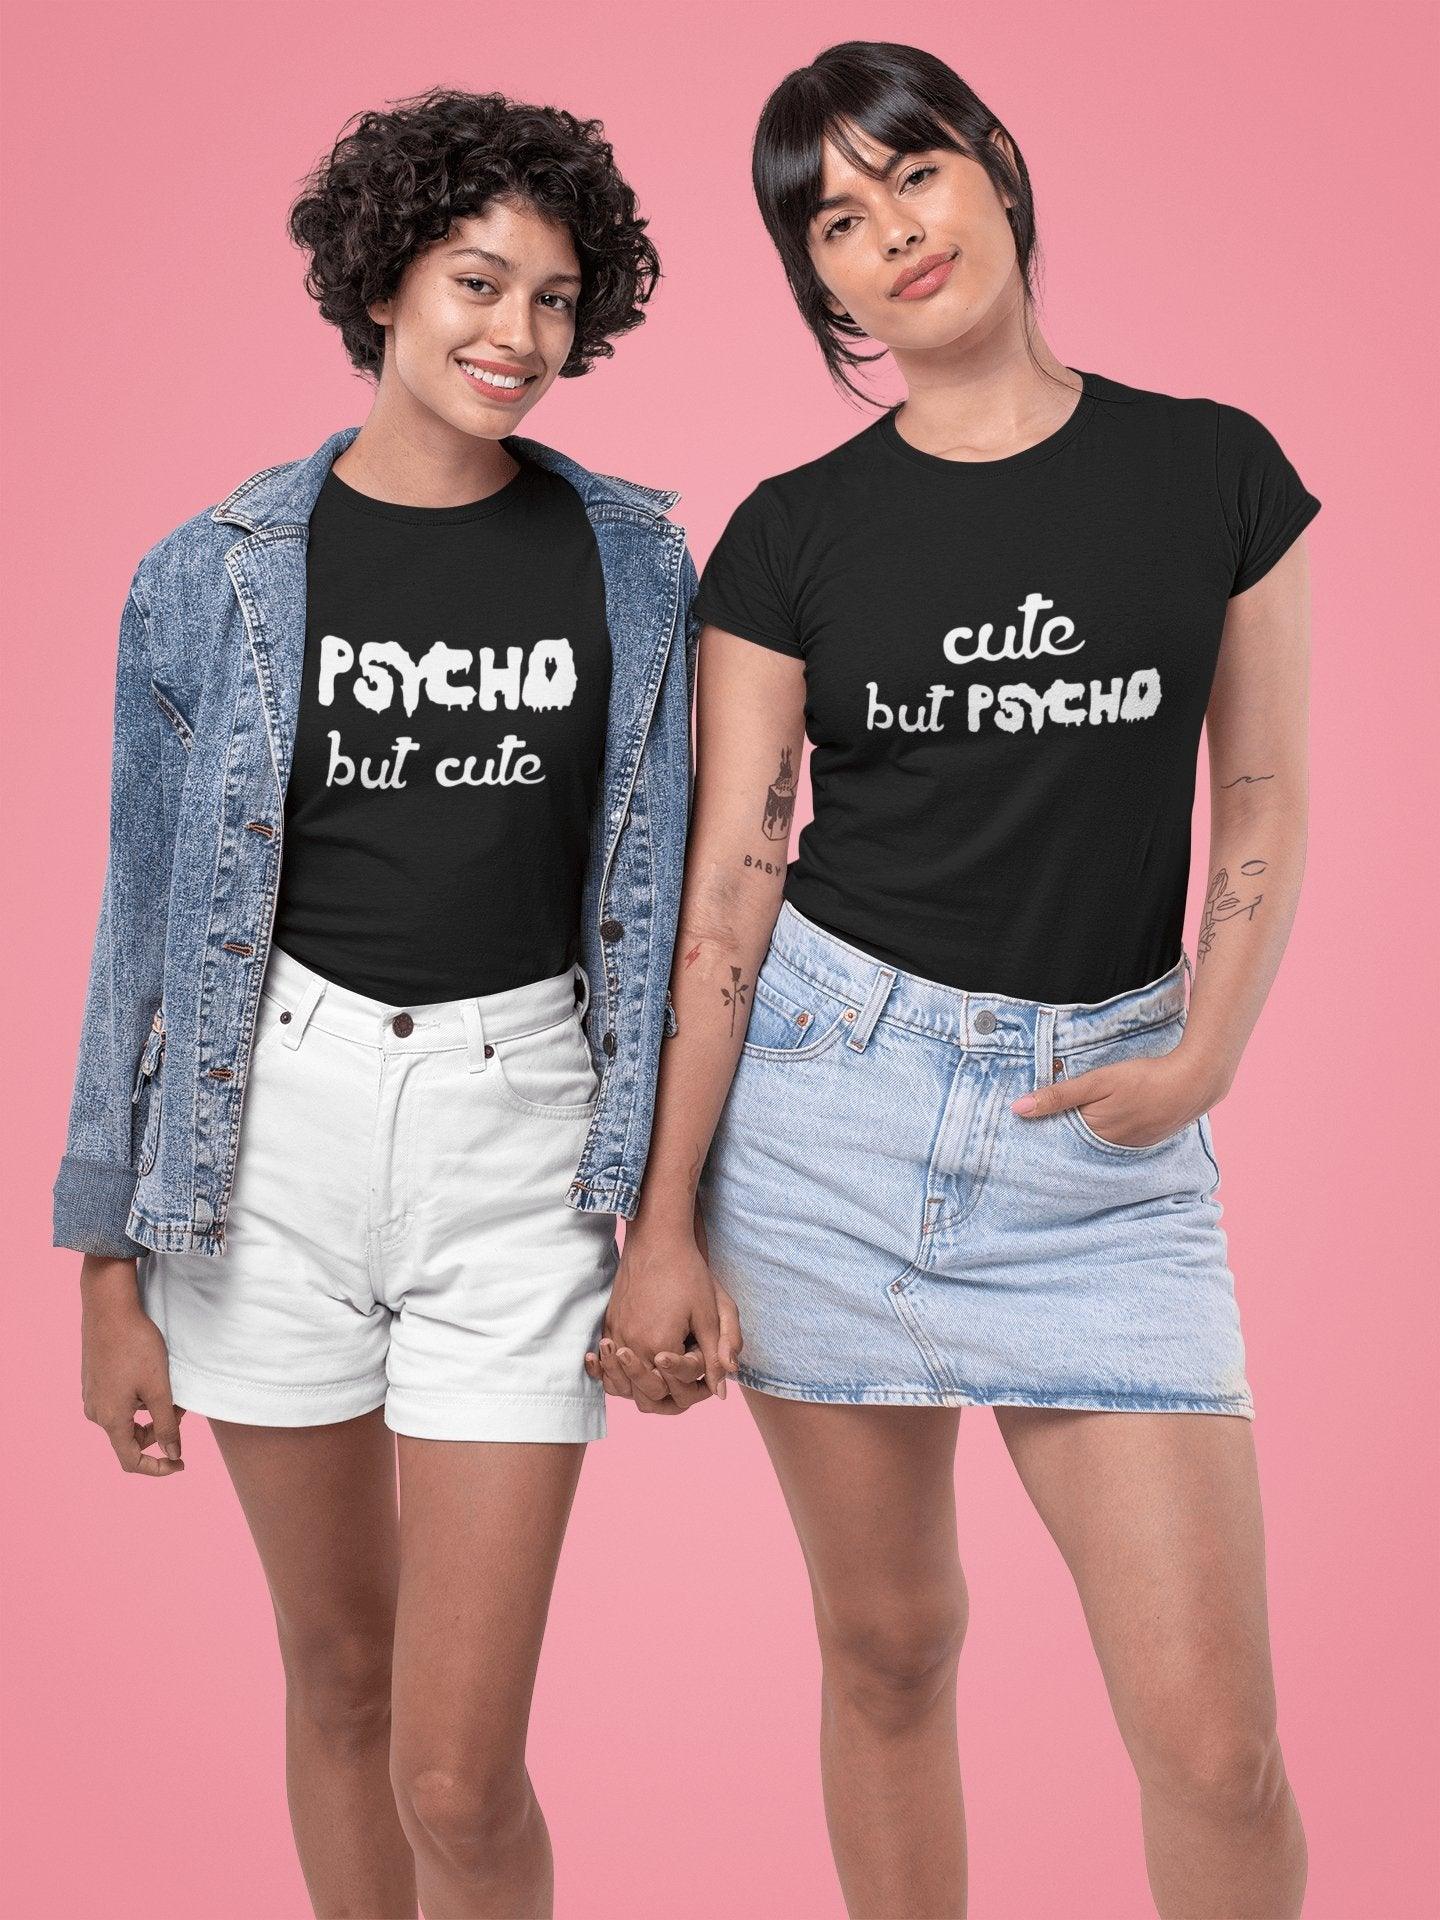 Pride T Shirts For Women In Black Colour - Psycho But Cute and Cute But Psycho Variant